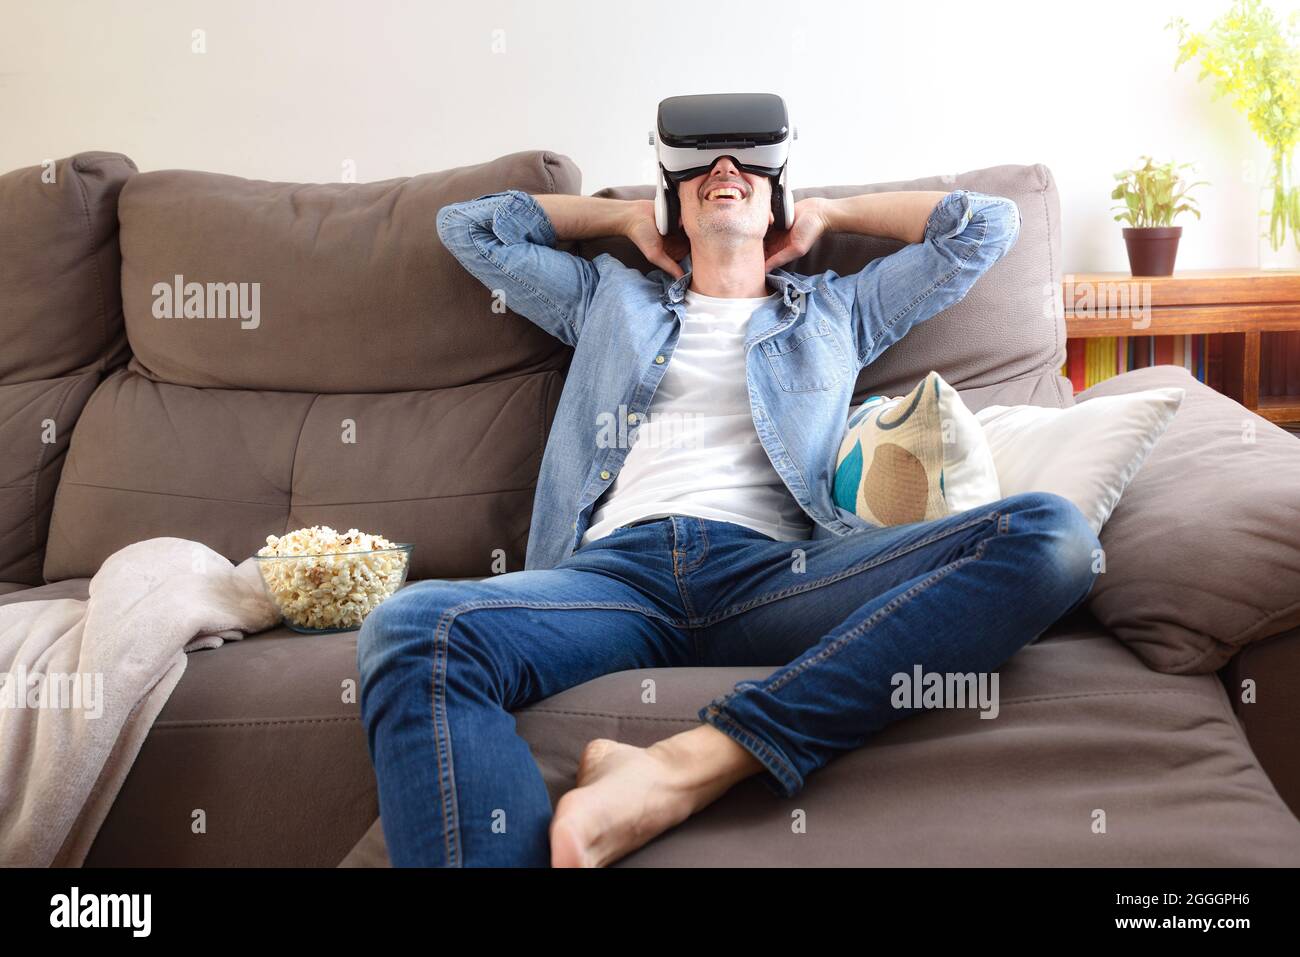 Relaxed entertaining man at home watching movies in virtual reality glasses sitting on the couch with popcorn Stock Photo